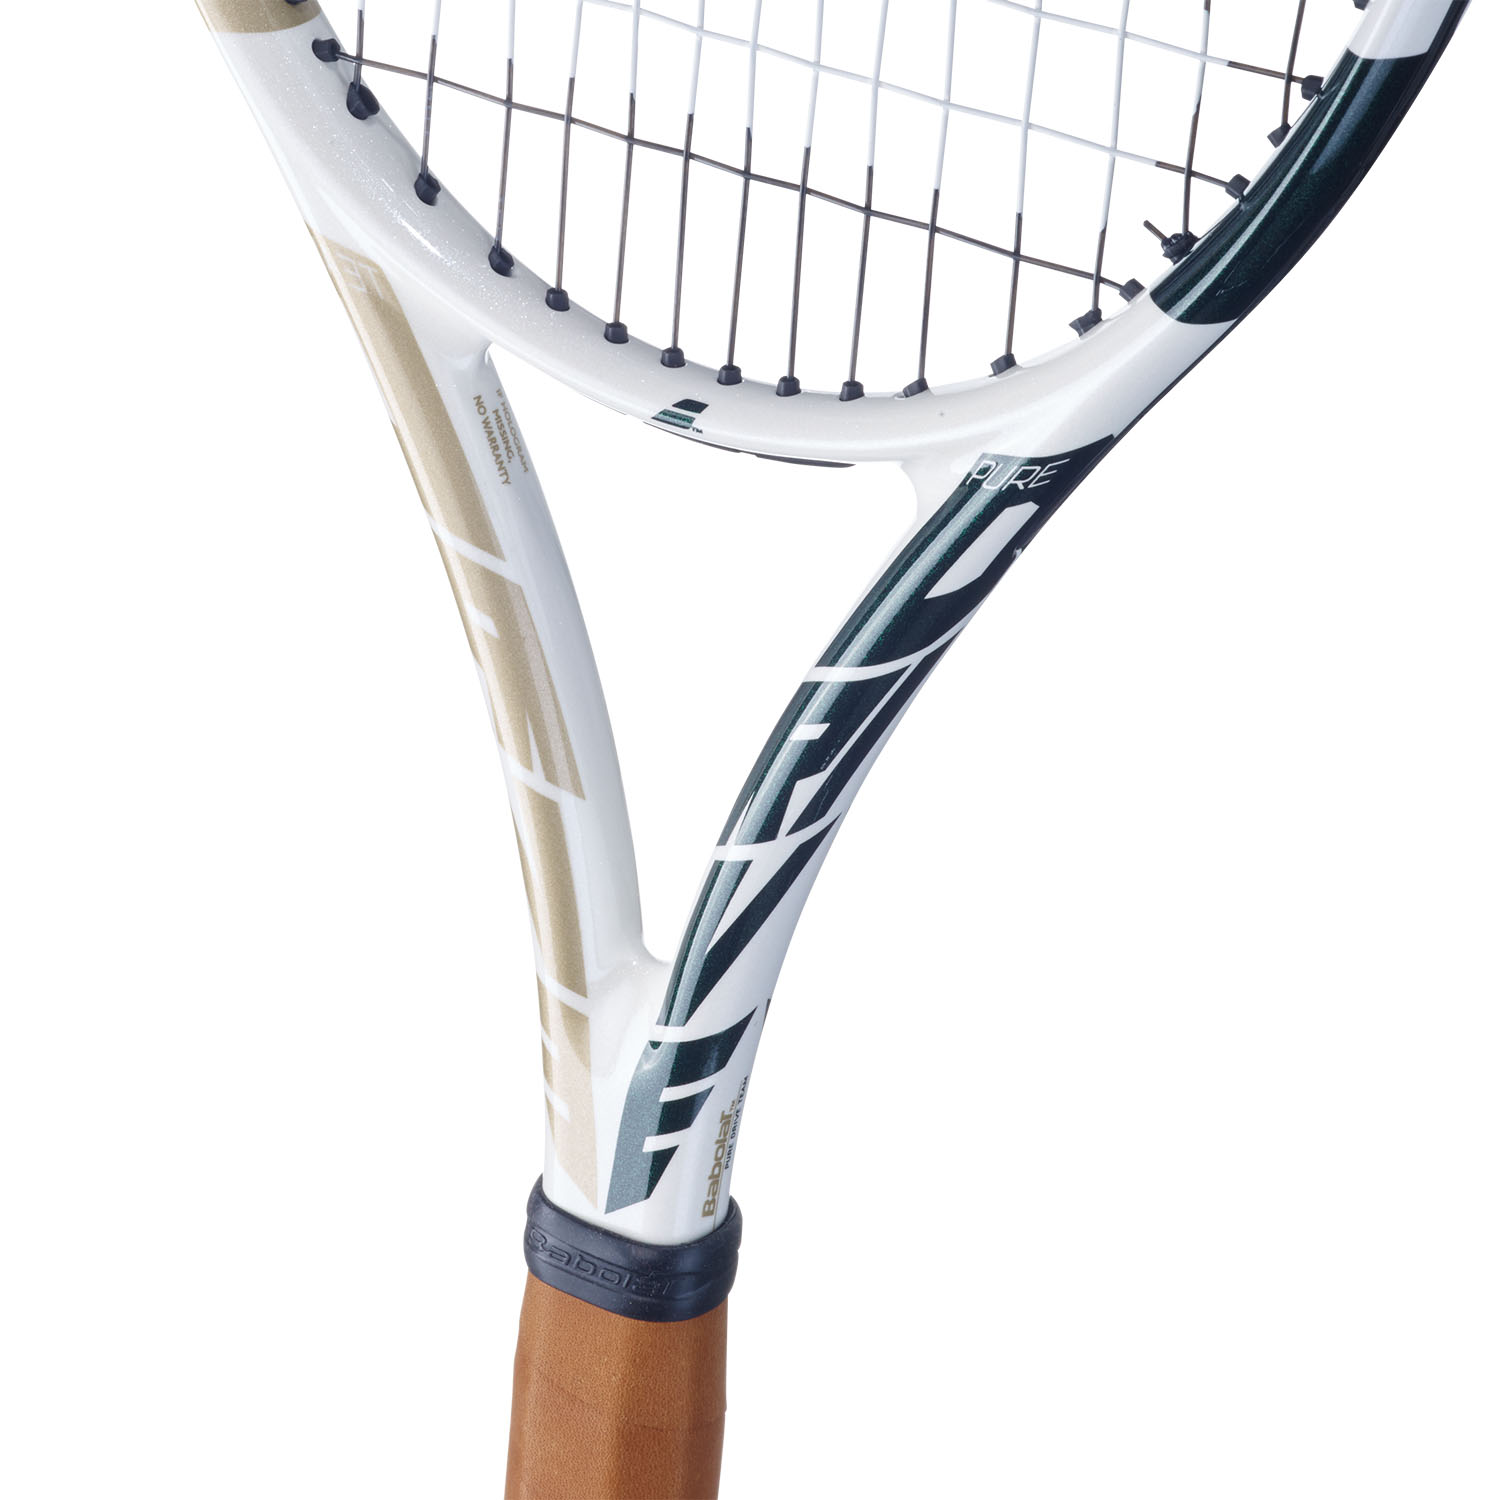 Babolat Drive 109 Tennis Racket RRP £199 CLEARANCE SPECIAL 